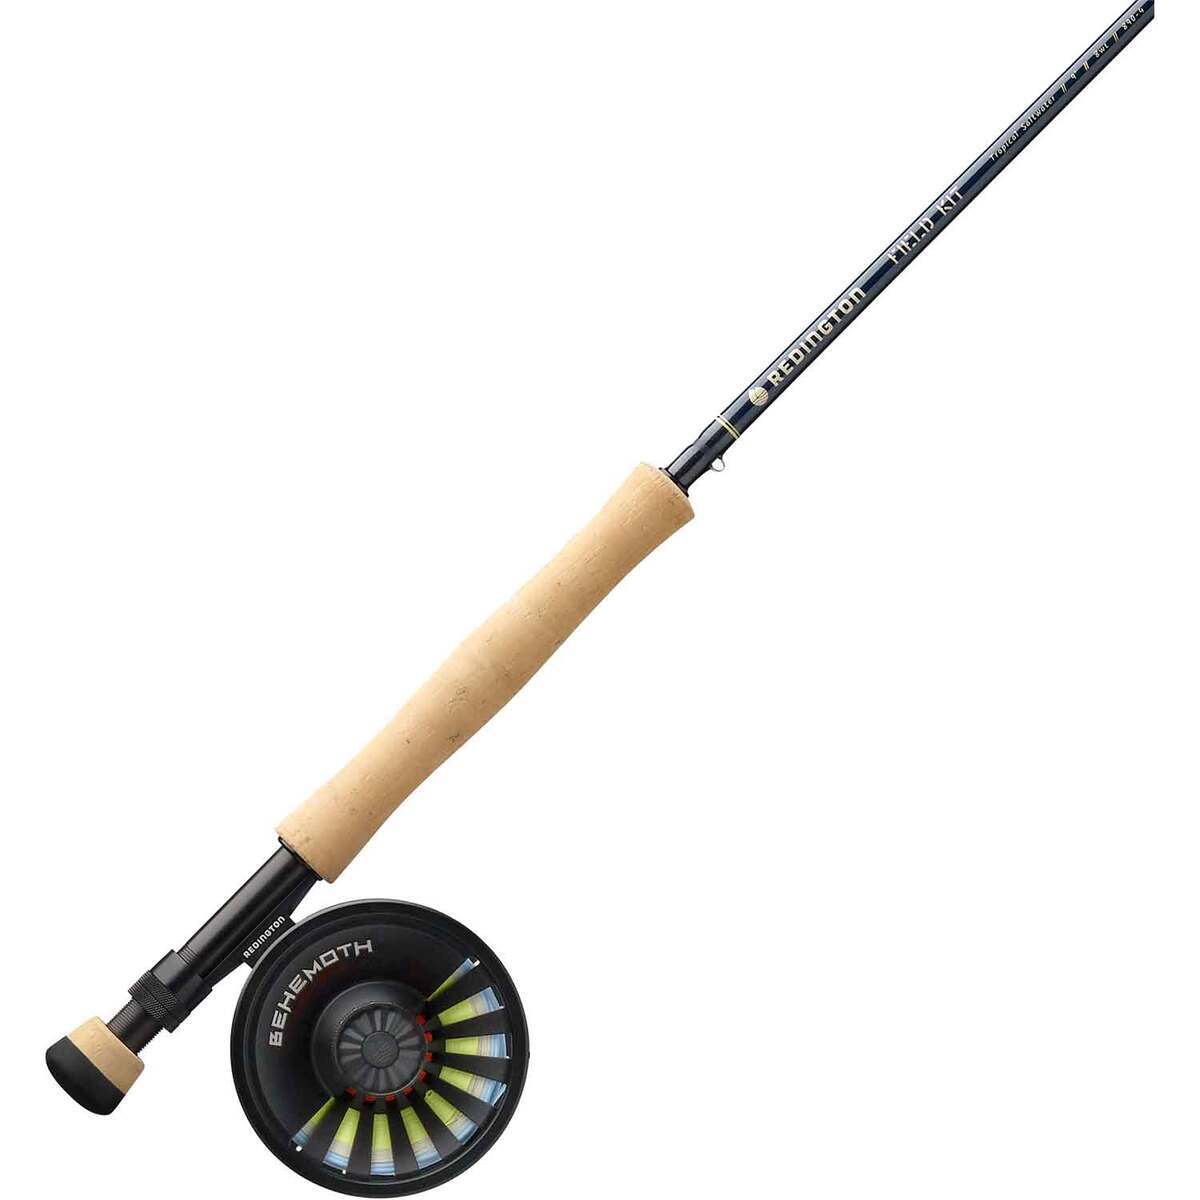 Redington Tropical Saltwater Field Kit Fly Fishing Rod and Reel